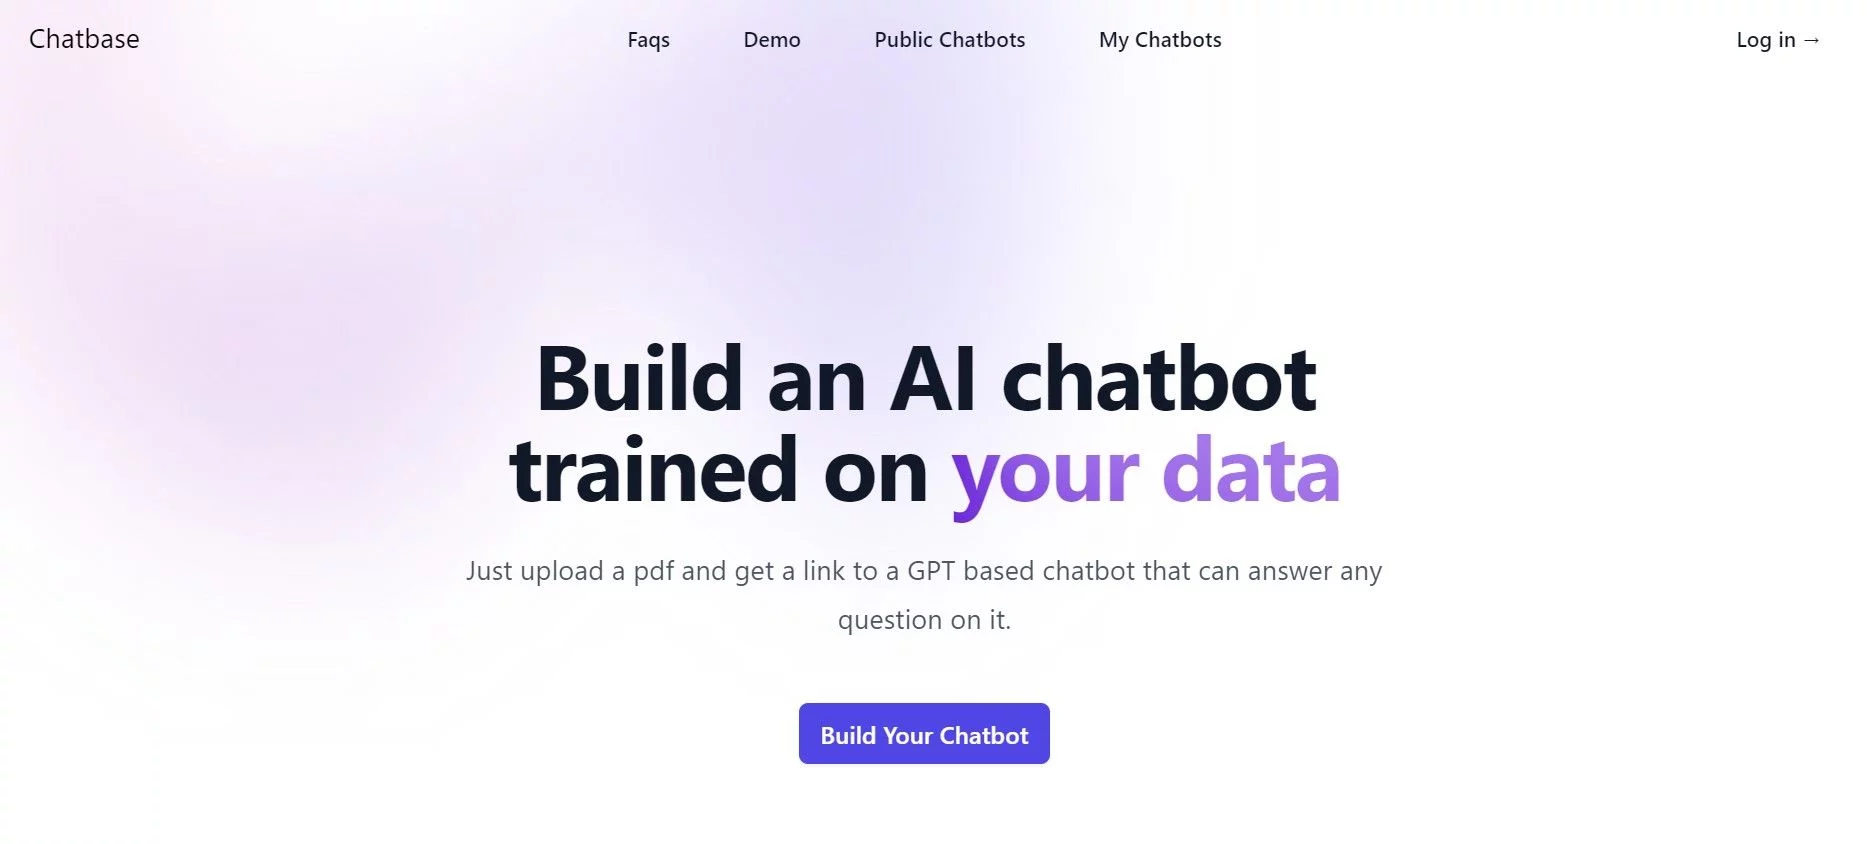  Build an AI chatbot trained on your data